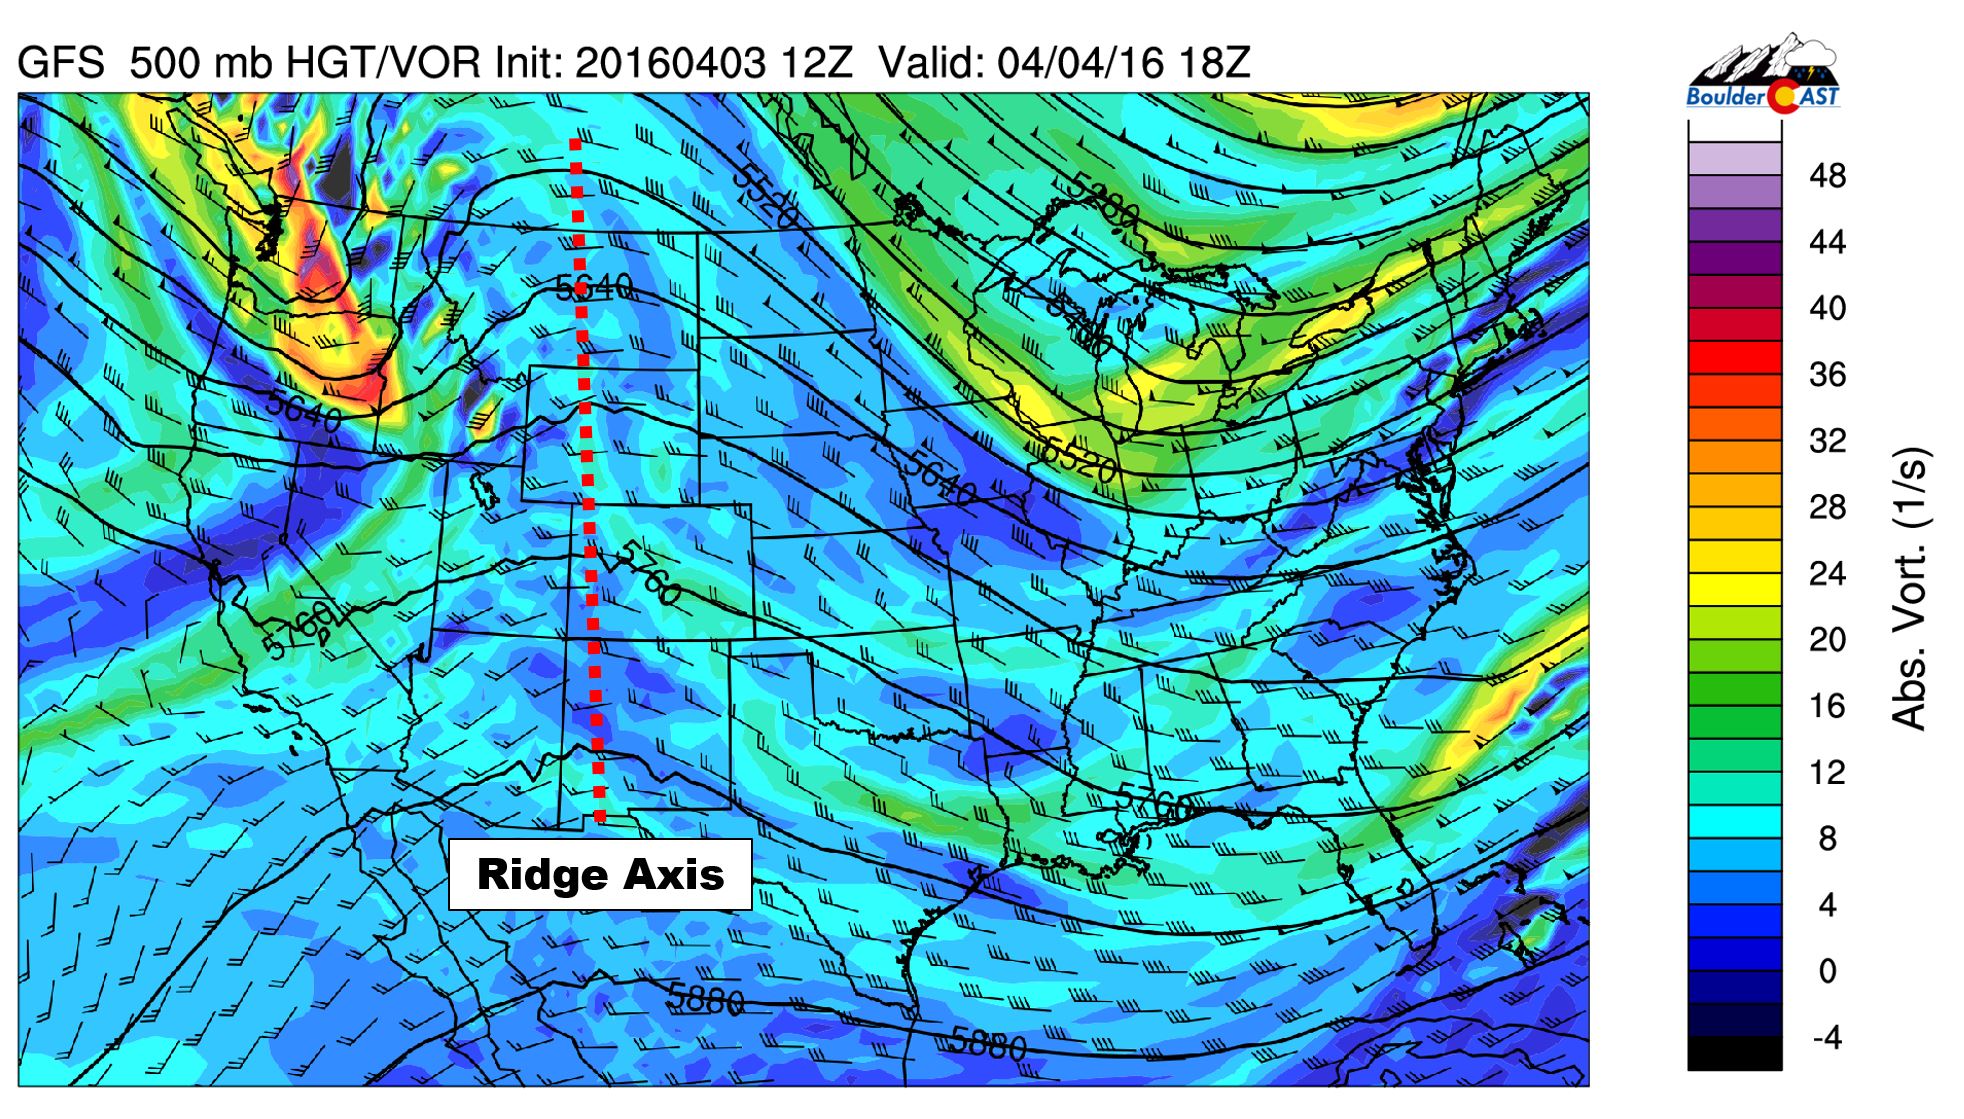 GFS 500 mb vorticity map valid this afternoon. The ridge axis is centered over Colorado